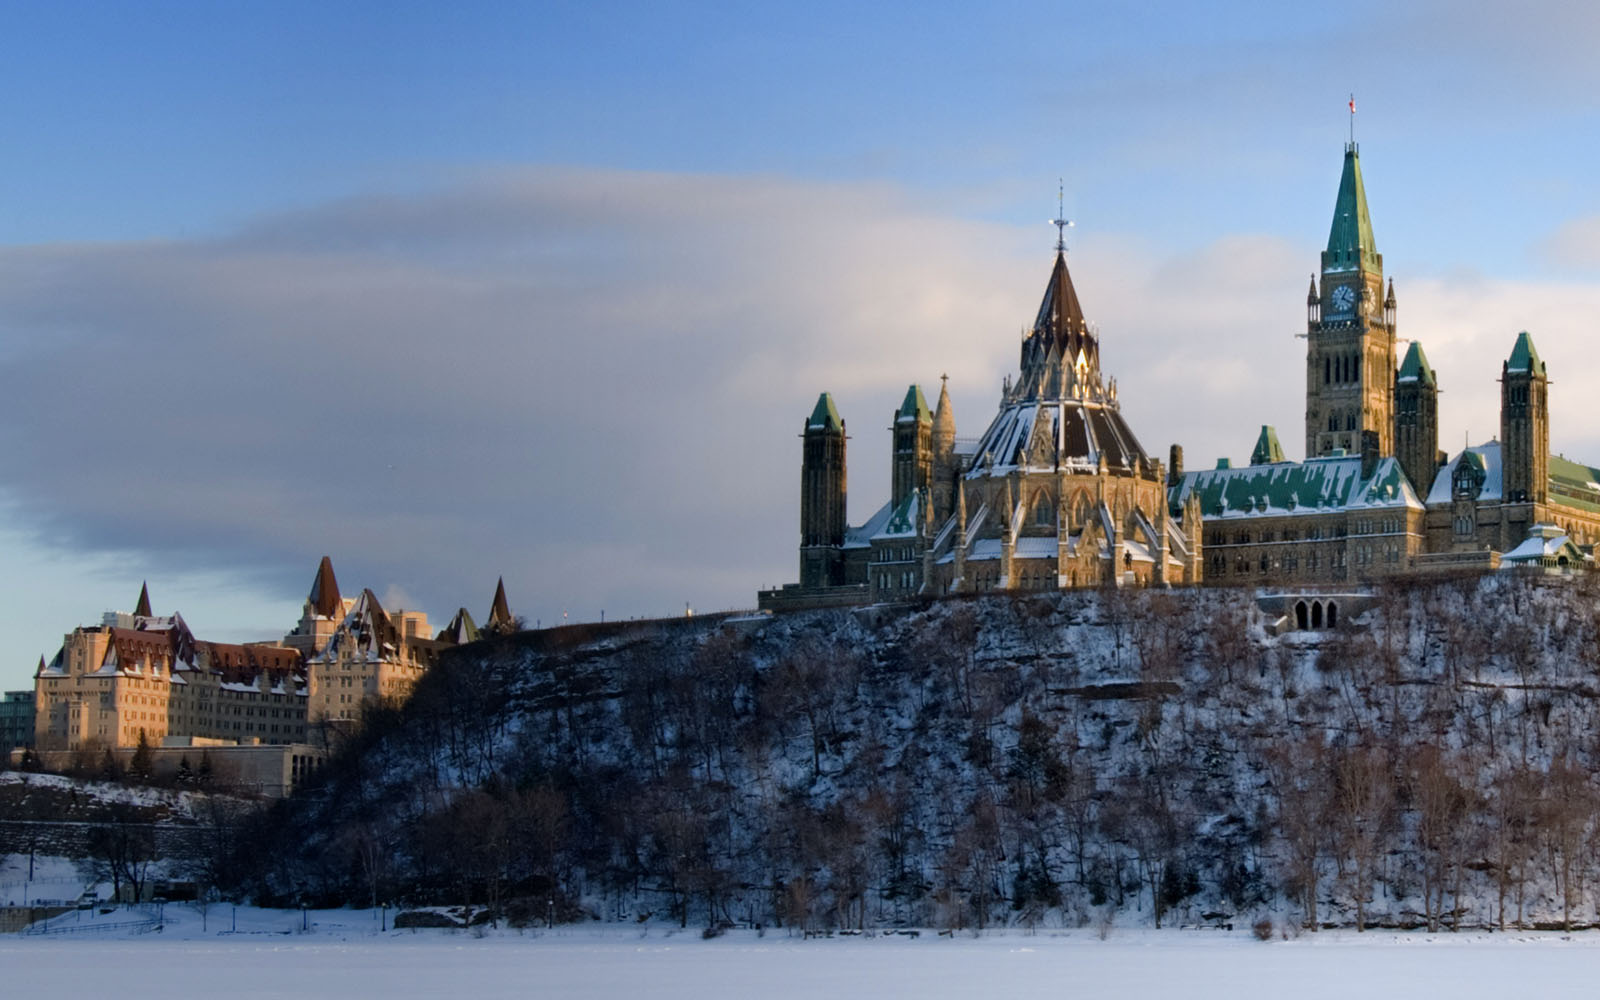 parliament of Canada seen from across the Ottawa river in winter